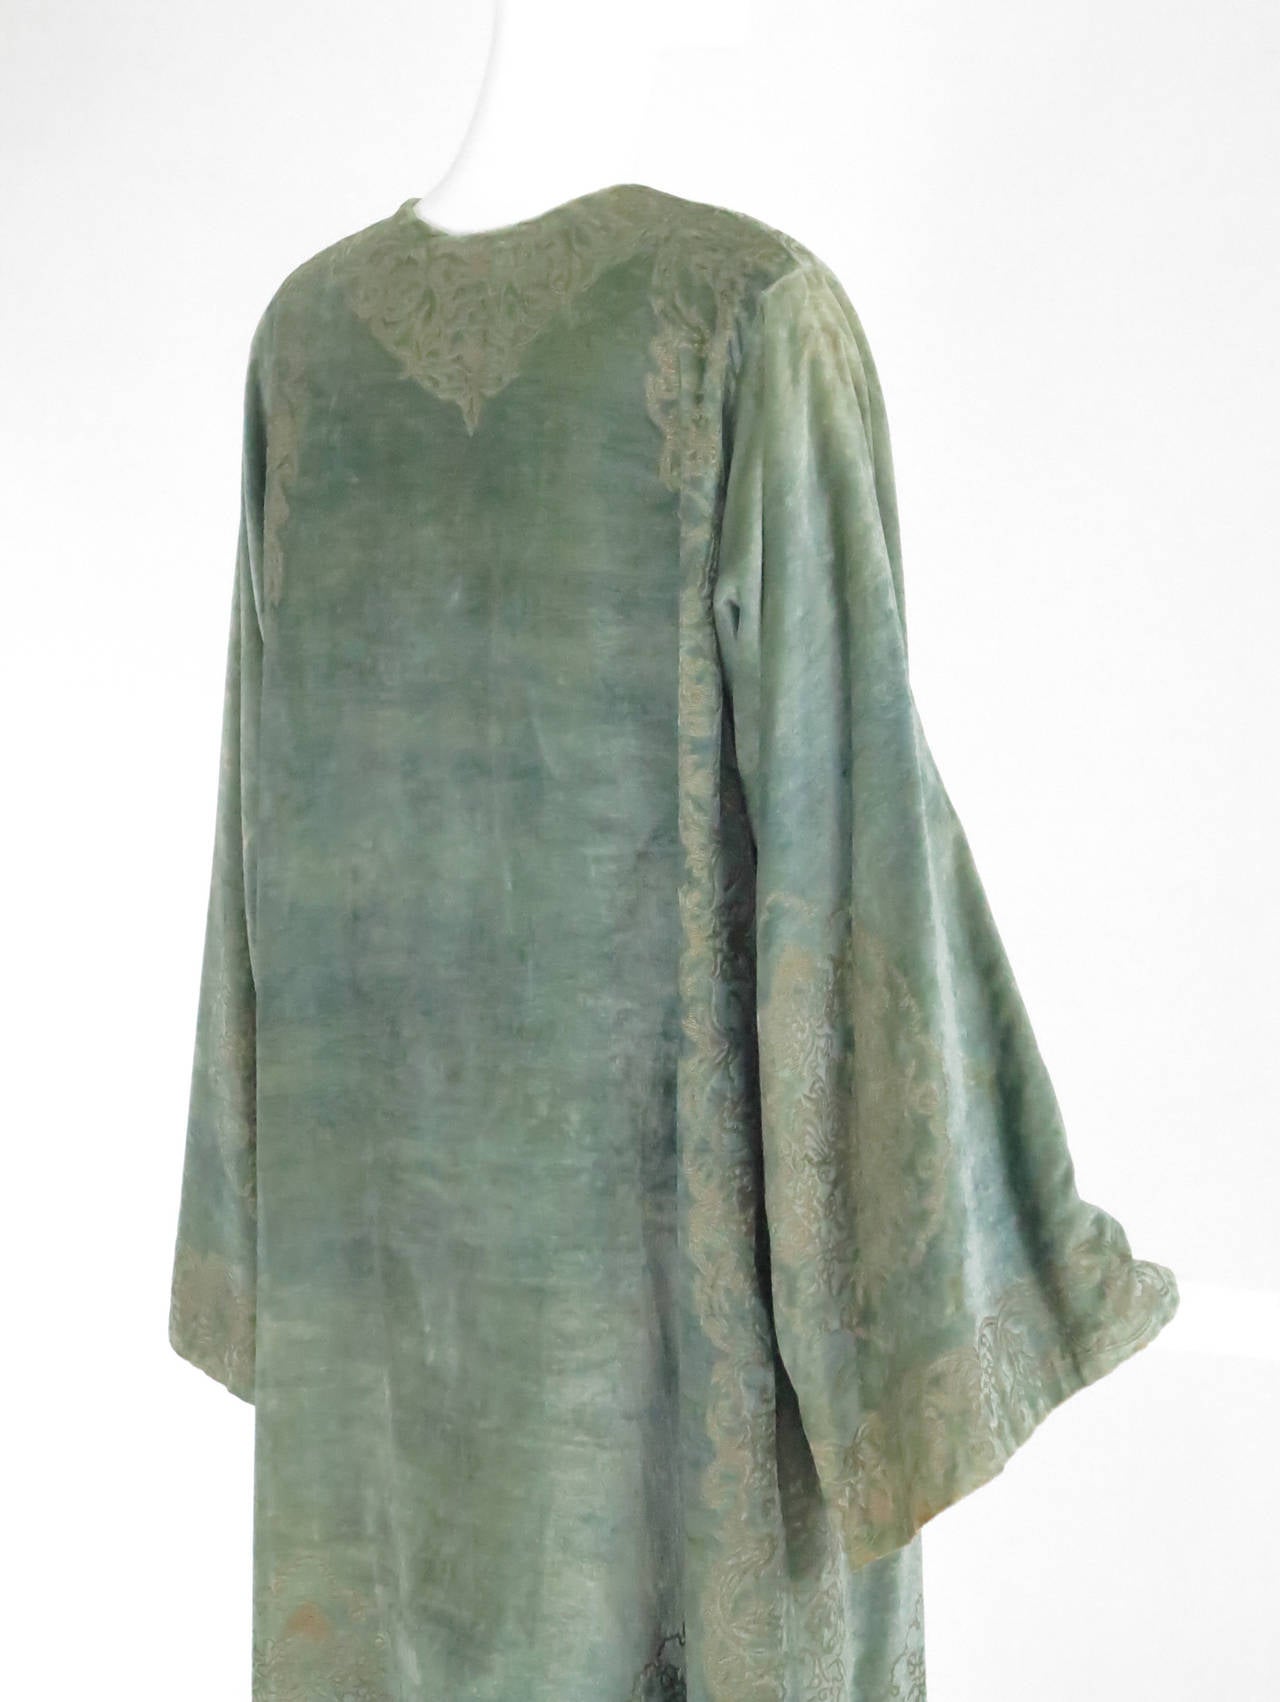 Mariano Fortuny sea green stenciled silk velvet coat early 1900s Fortuny In Good Condition In West Palm Beach, FL